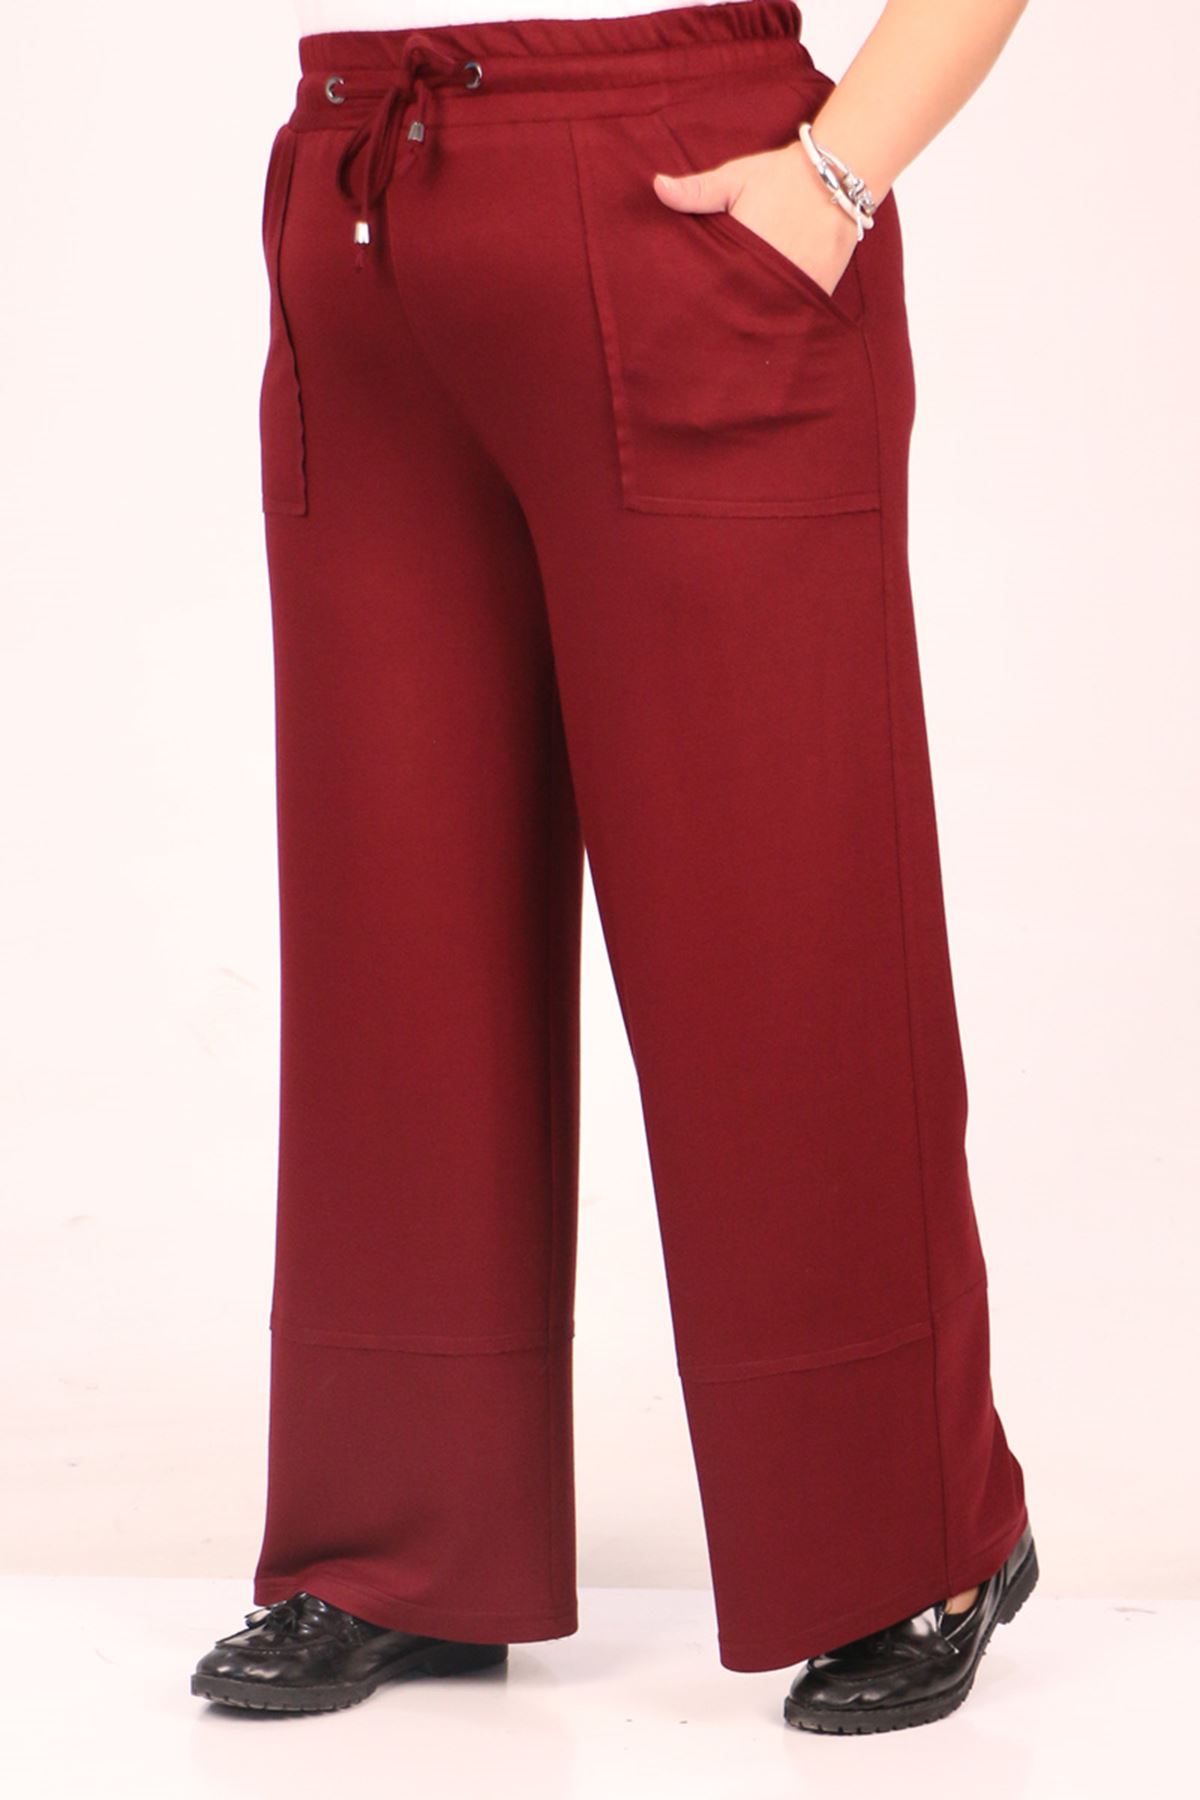 39038 Large Size Elastic Waist Crystal Two Thread Wide Leg Trousers-Burgundy